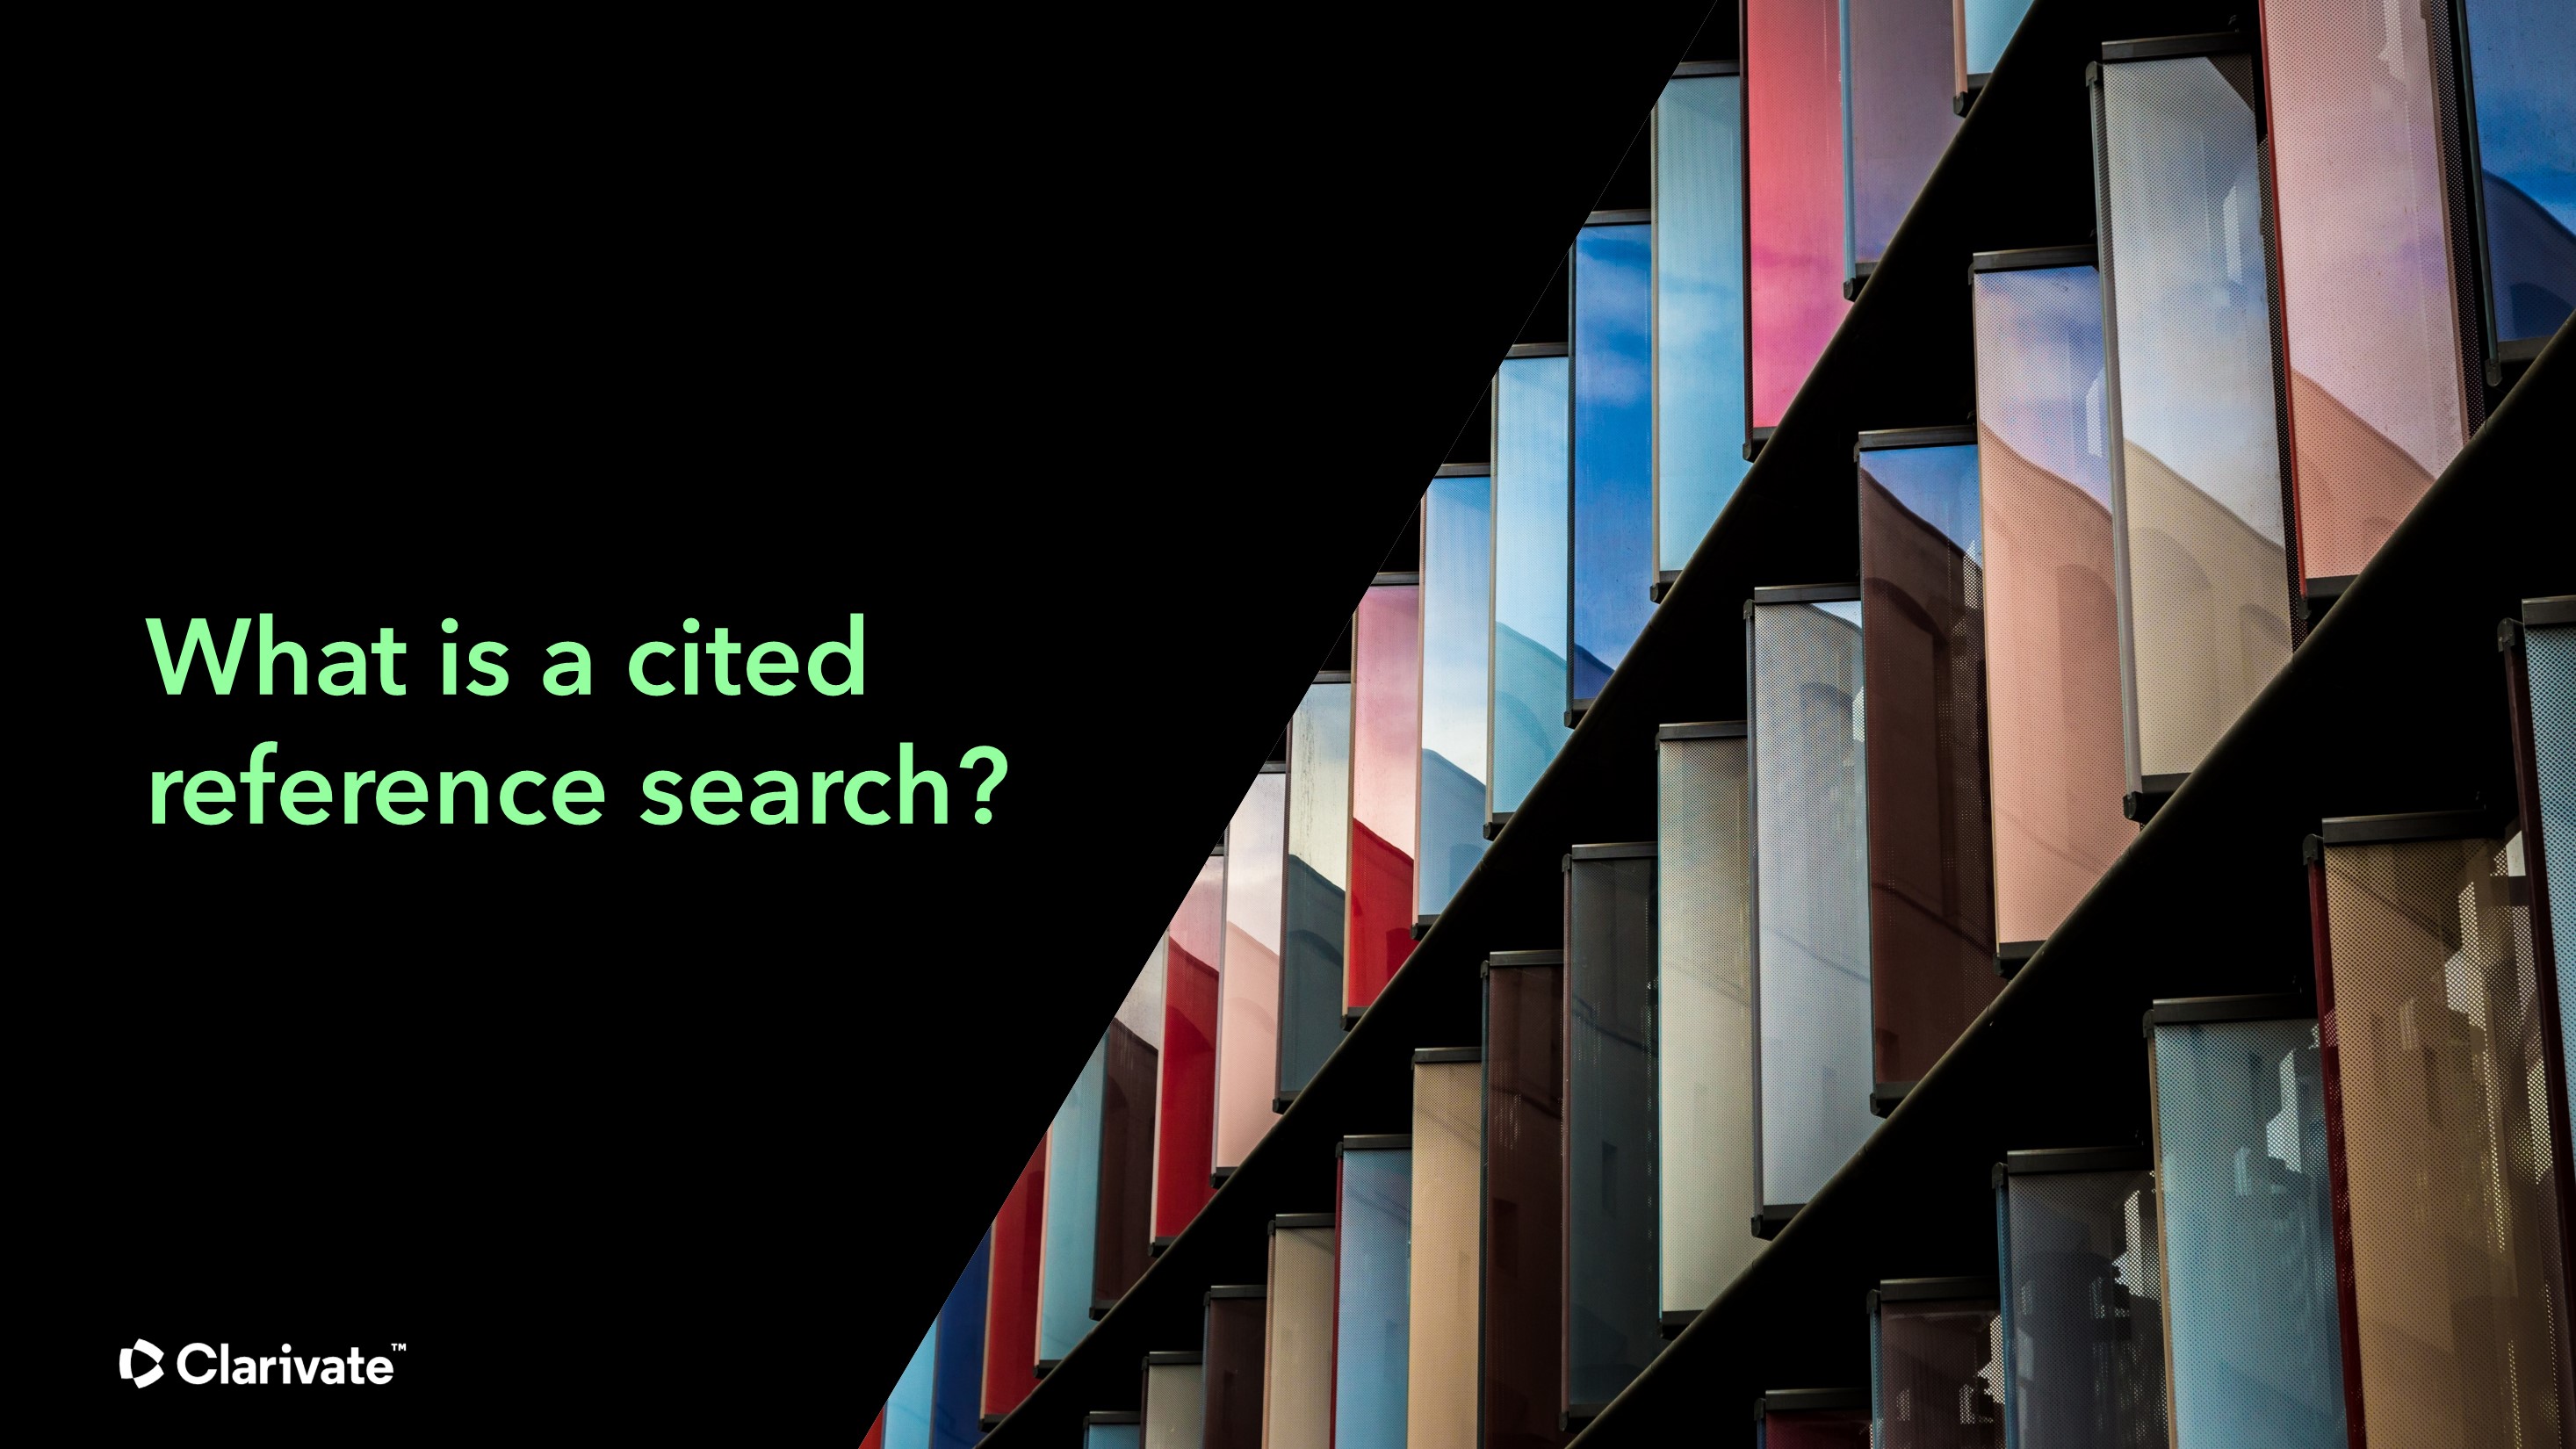 Video: Cited Reference Searching to find relevant journal articles